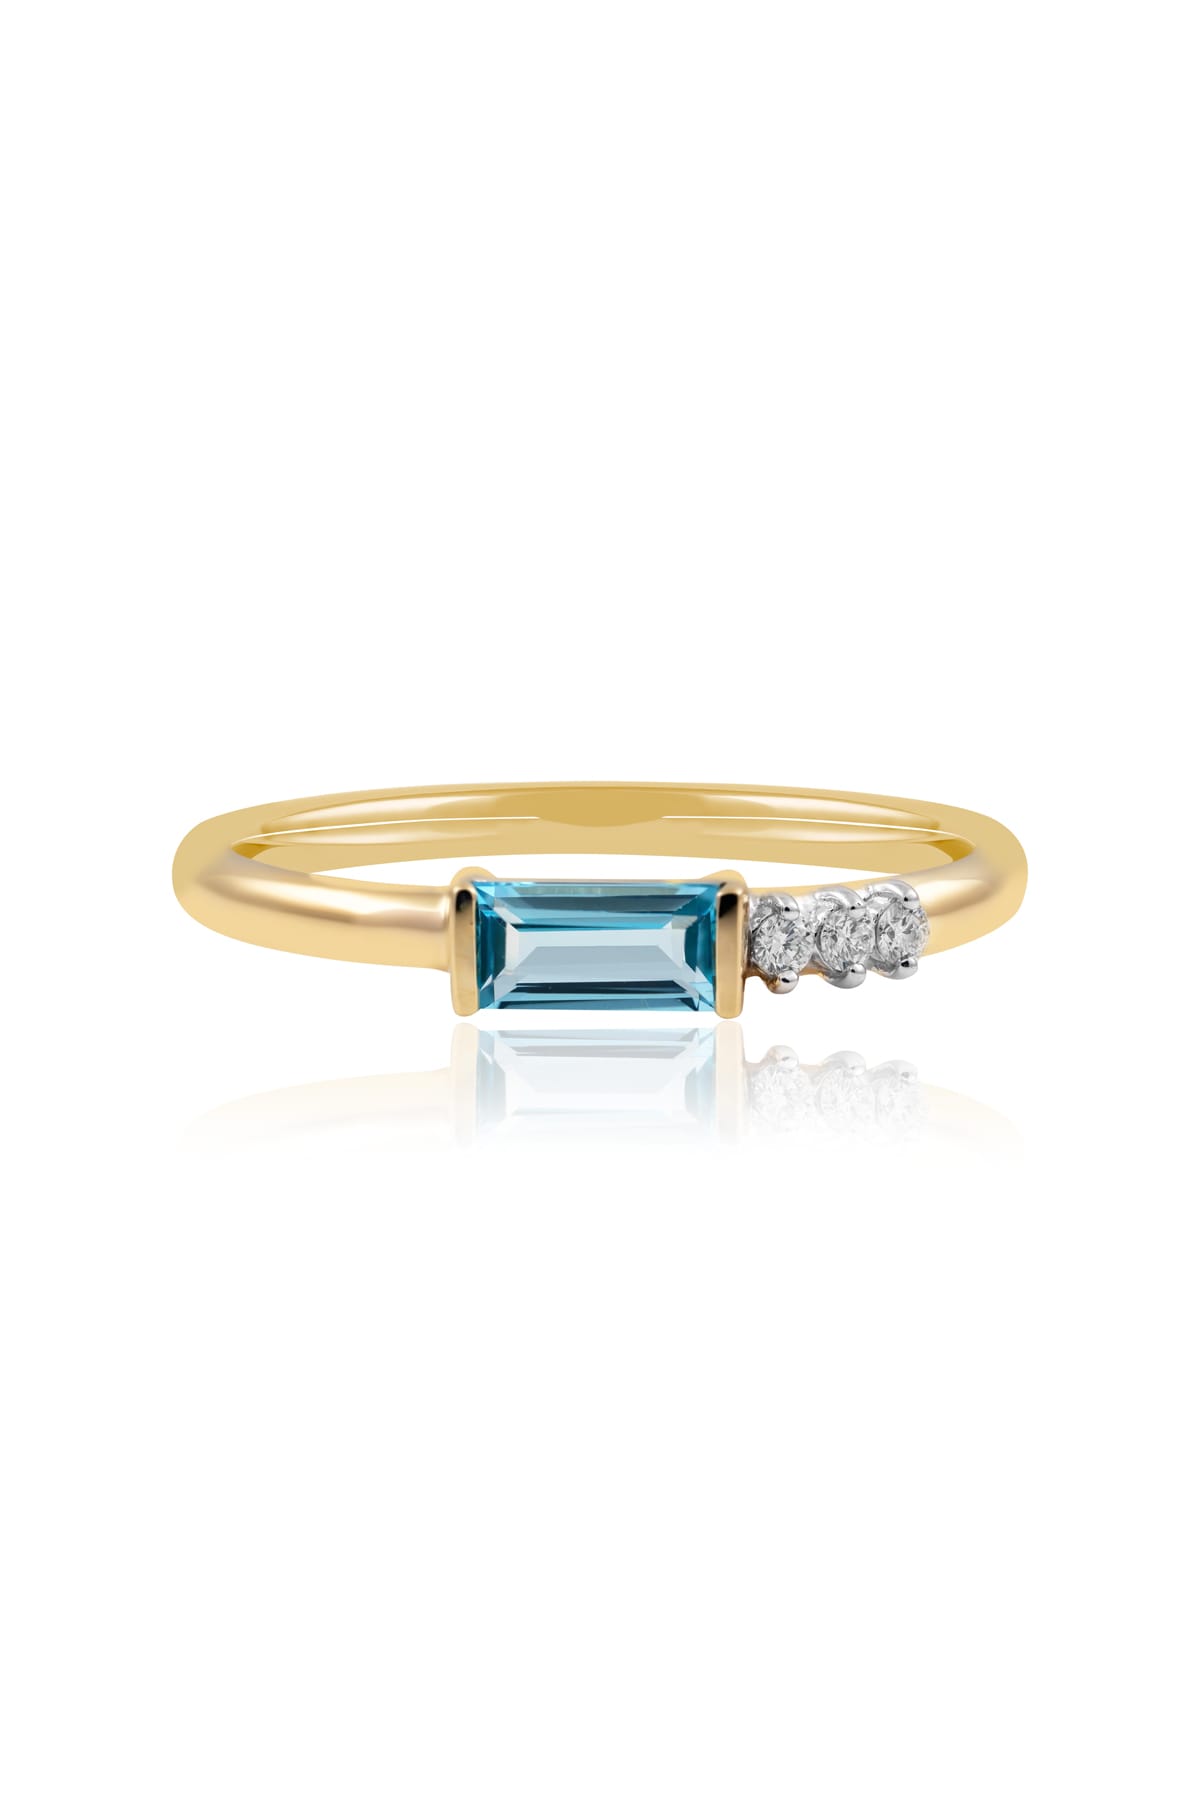 0.50ct Baguette Cut Blue Topaz And Diamond Ring from LeGassick.